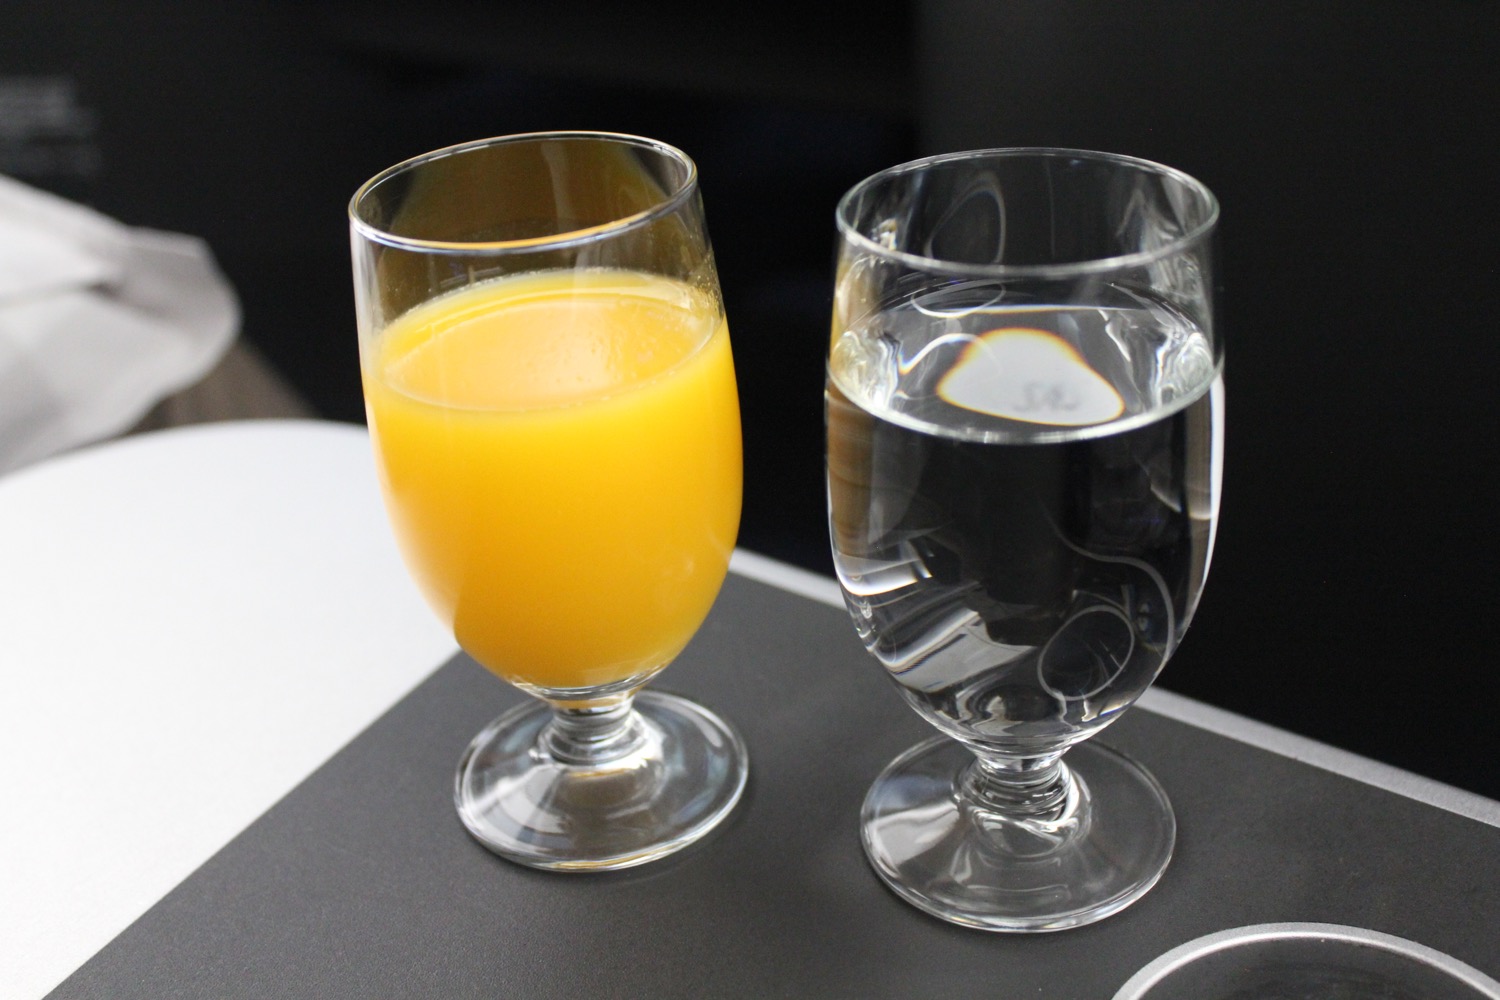 a glass of orange juice and a clear glass of water